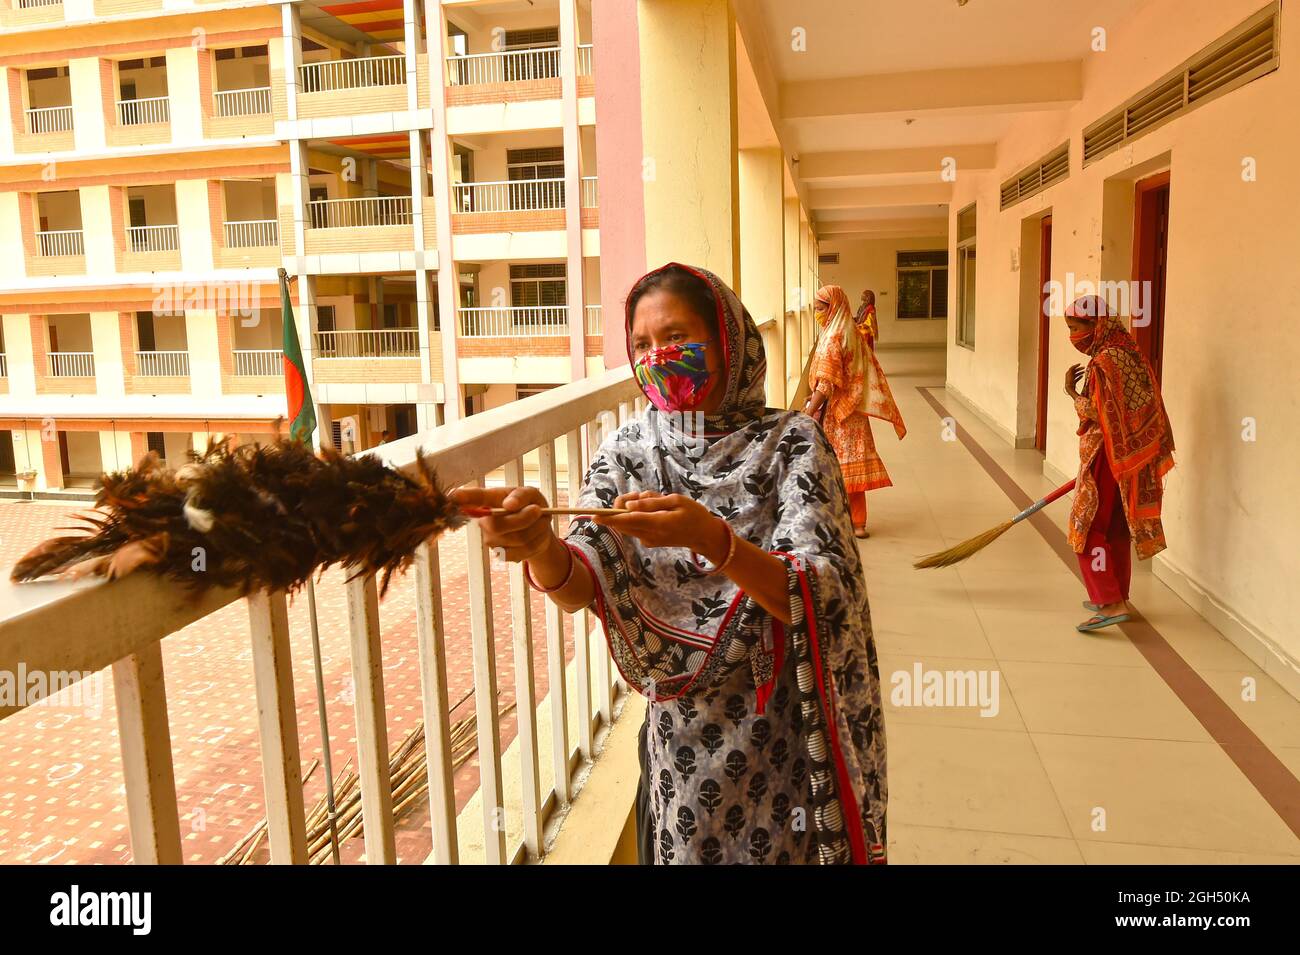 Dhaka. 5th Sep, 2021. A staff member cleans balcony railing of a school in Dhaka, Bangladesh, on Sept. 5, 2021. The Bangladeshi government has announced the reopening of schools and colleges in the country from Sept. 12 after a closure of around 18 months. Credit: Xinhua/Alamy Live News Stock Photo